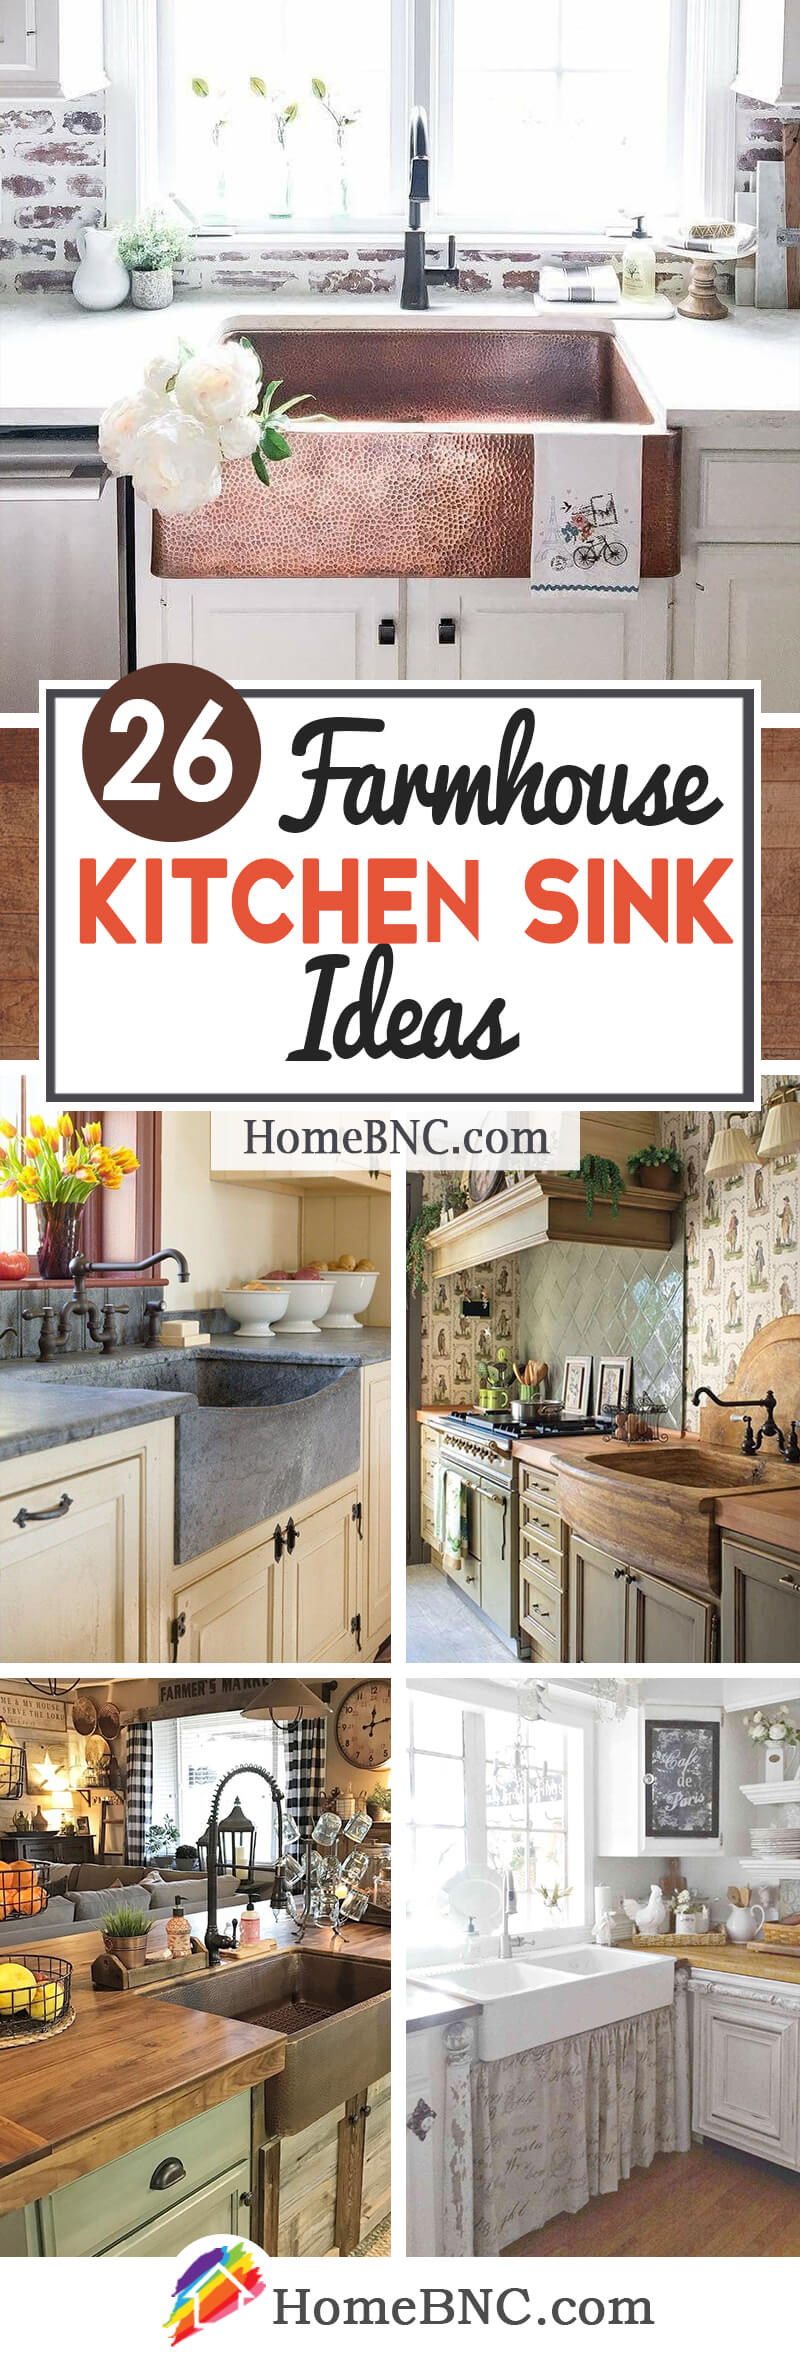 25 Farmhouse Kitchen Sink Ideas and Designs for 25